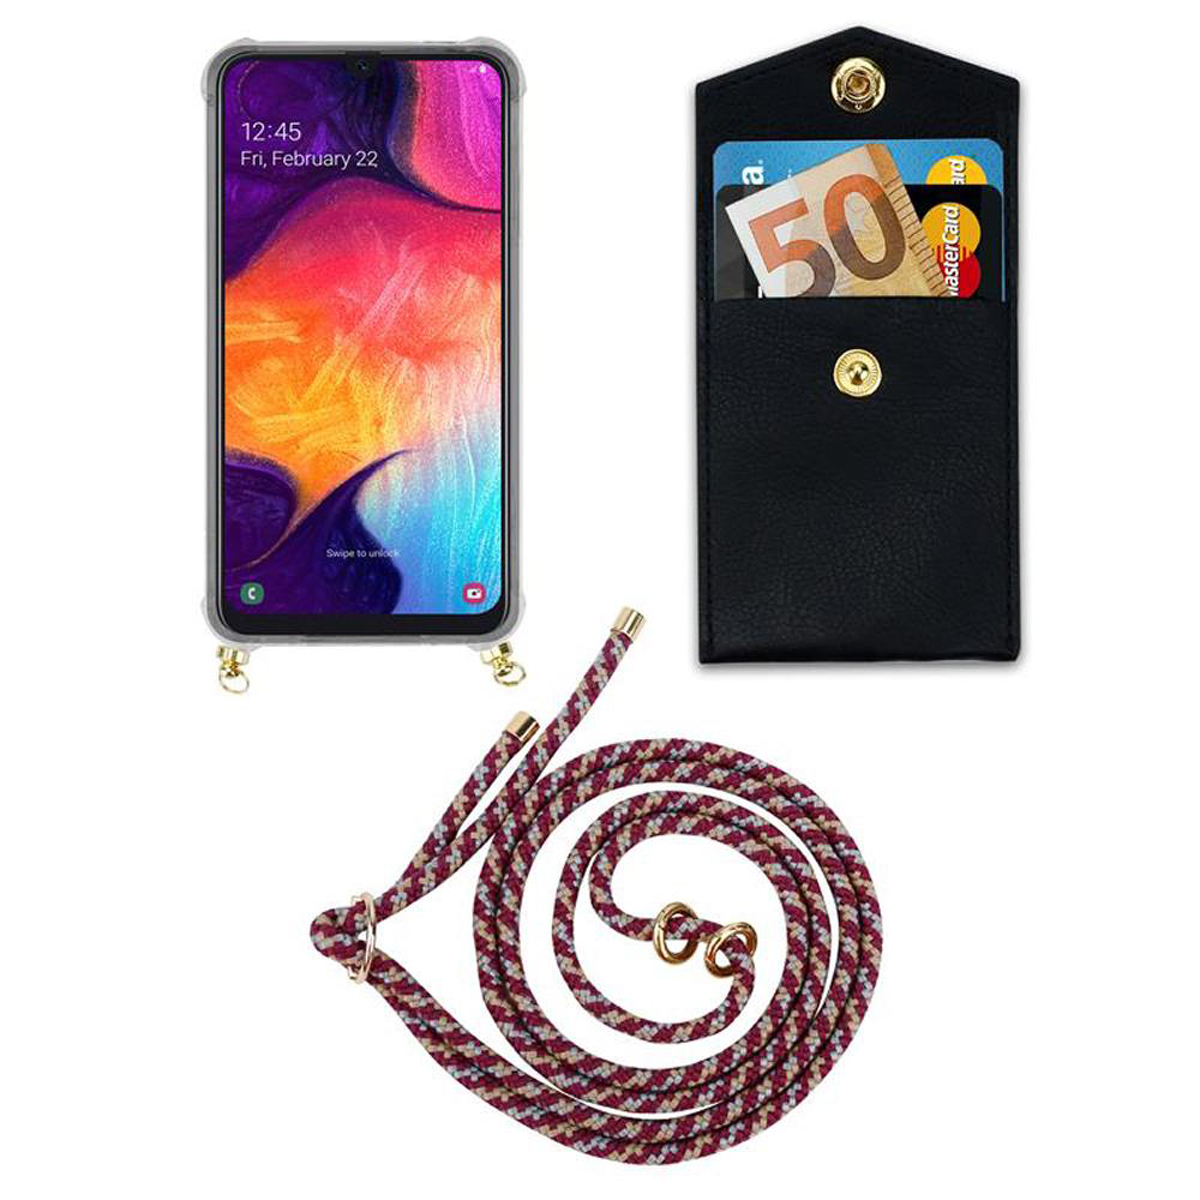 CADORABO Handy Kette mit Gold Backcover, A30s, Kordel 4G / GELB Galaxy Hülle, A50s WEIß und Samsung, / abnehmbarer A50 ROT Band Ringen